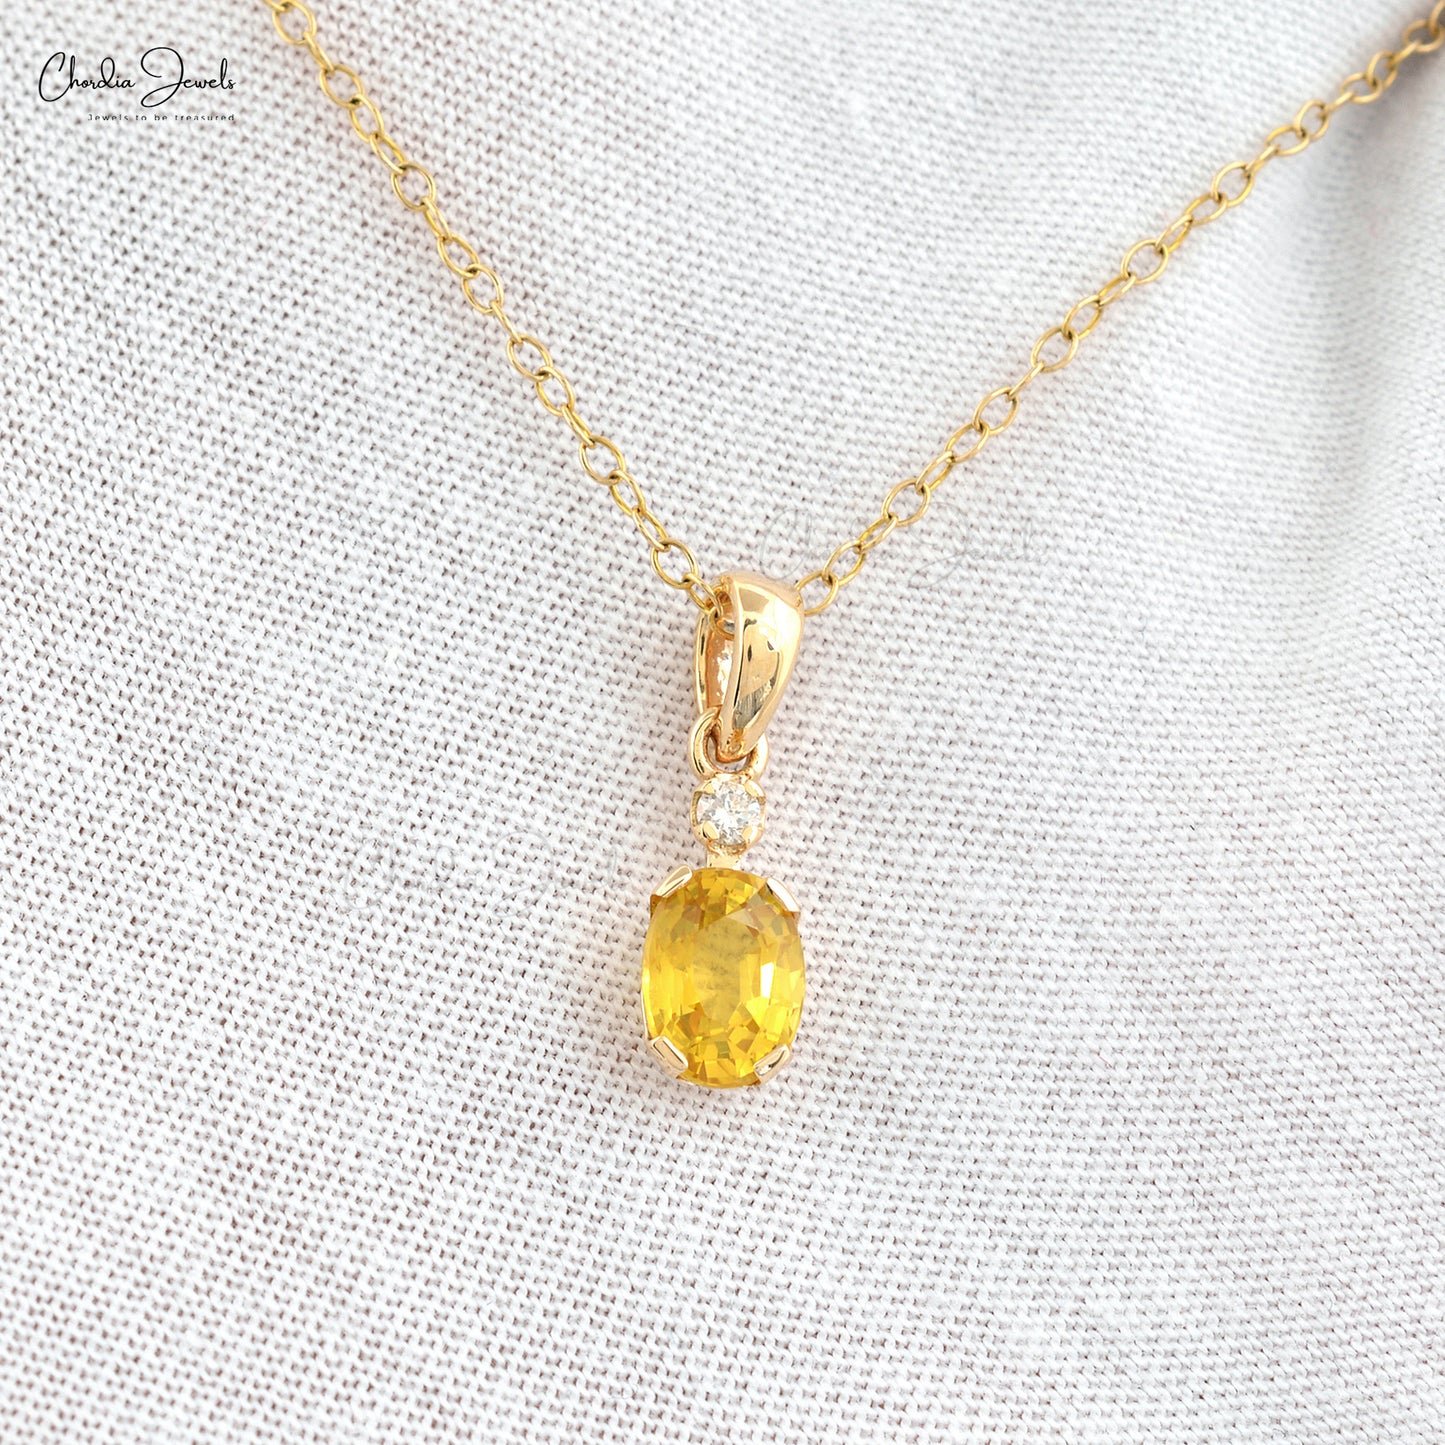 Natural Diamond Accent Pendant Necklace Real 14k Yellow Gold Oval Shape Yellow Sapphire Gemstone Pendant Perfect Gift For Her